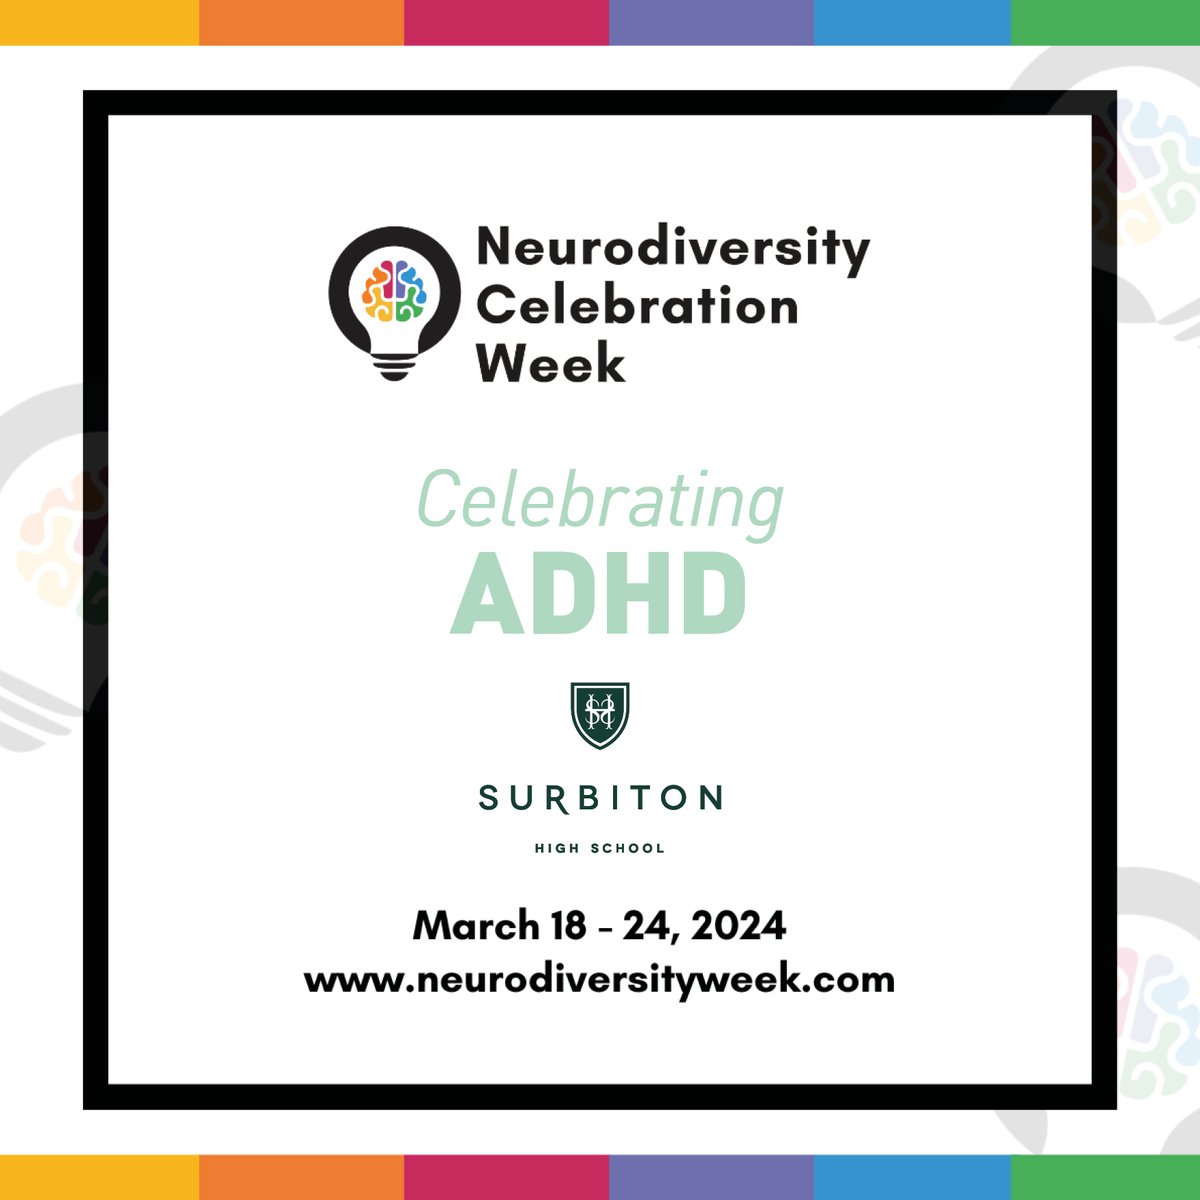 Did you know there are three forms of ADHD? ADHD-I: attention difficulties ADHD-H: impulsive/hyperactive behavior ADHD-C: both In the UK, ADHD-I is 20-30%, ADHD-H 15%, and ADHD-C 50-75%. #NeurodiversityCelebrationWeek @NCWeek